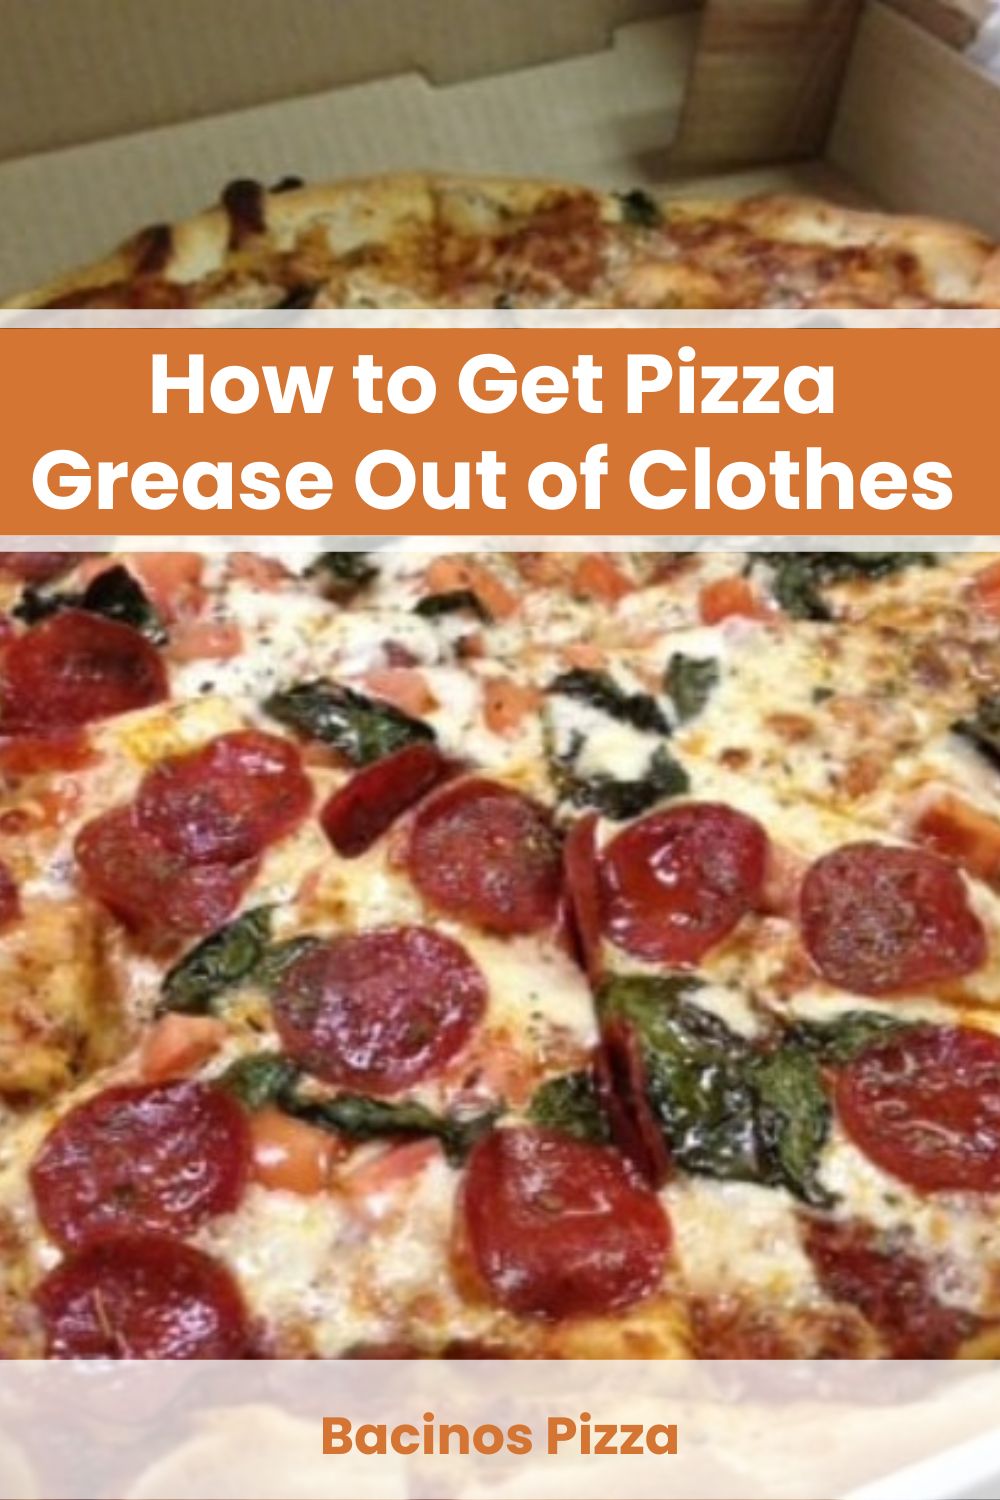 how to Get Pizza Grease Out of Clothes